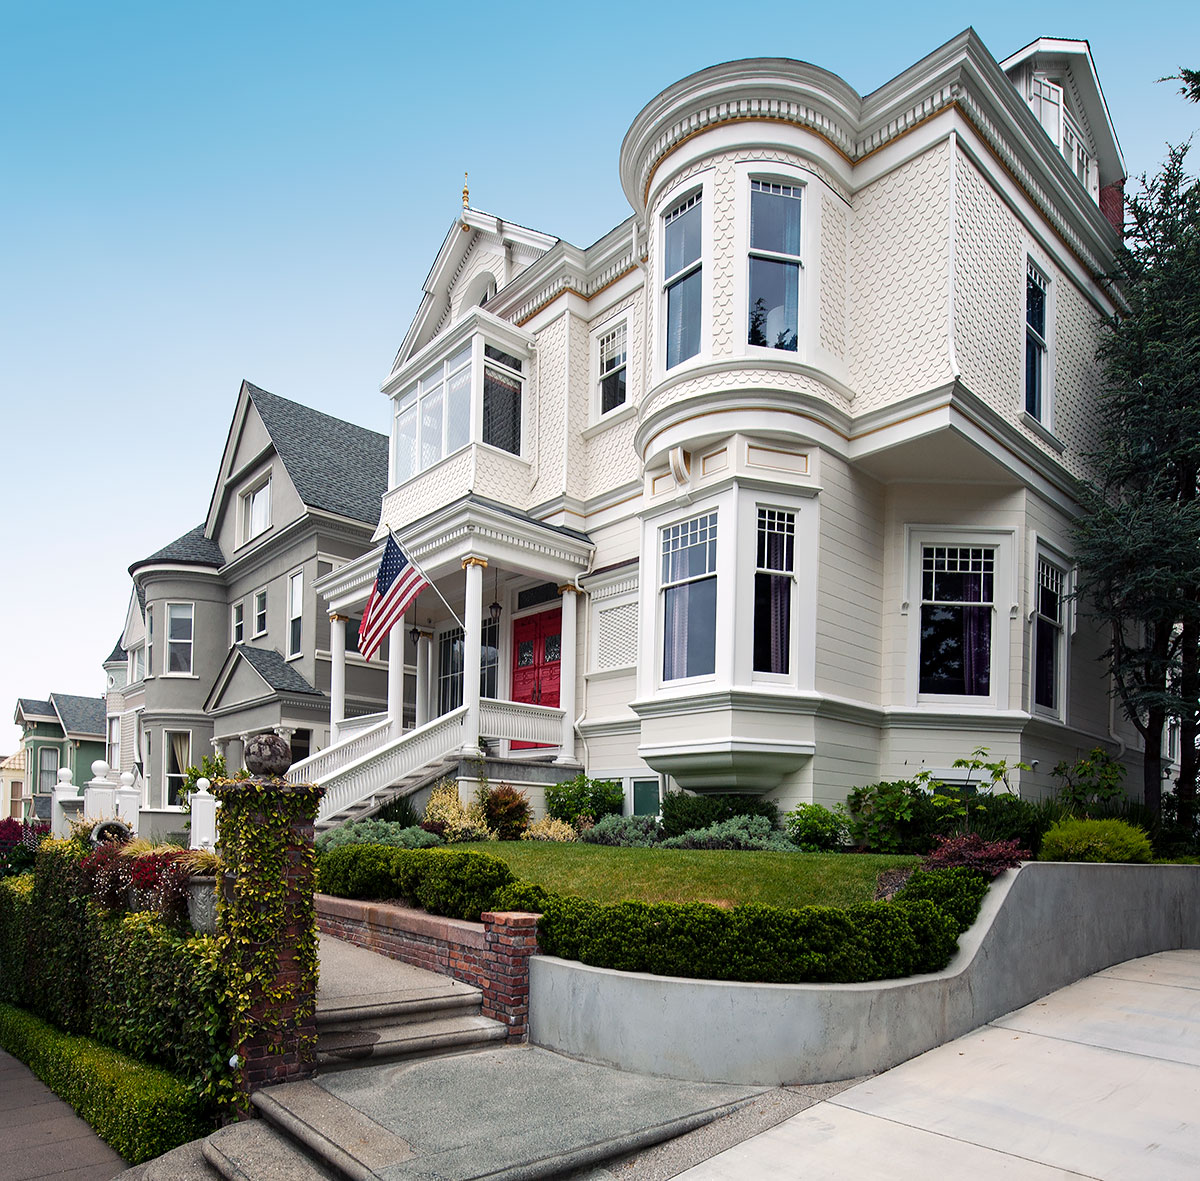 2214 Clay Street in Pacific Heights was designed by Newsom & Newsom and built in 1885.